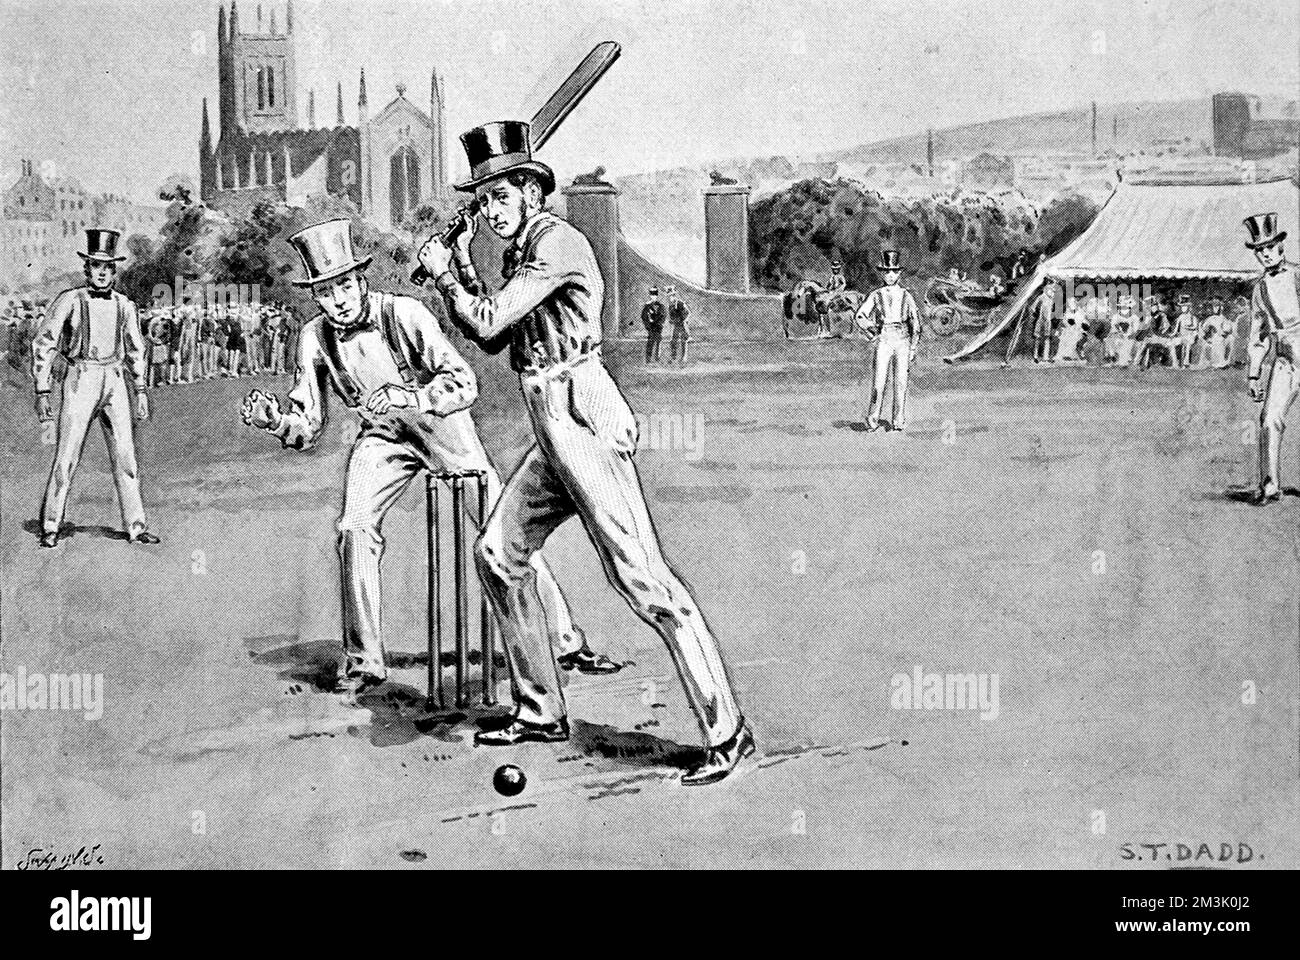 Illustration of Fuller Pilch (1804-1870) batting for Kent against Sussex, 1837.      Pilch was one of the best players of his day and from 1835 he was paid the handsome sum of 100 per year to play for Town Malling, the strongest team in Kent.      As can be seen in the illustration, top hats were 'de rigeur' in cricket matches in those days.     Date: 1901 Stock Photo